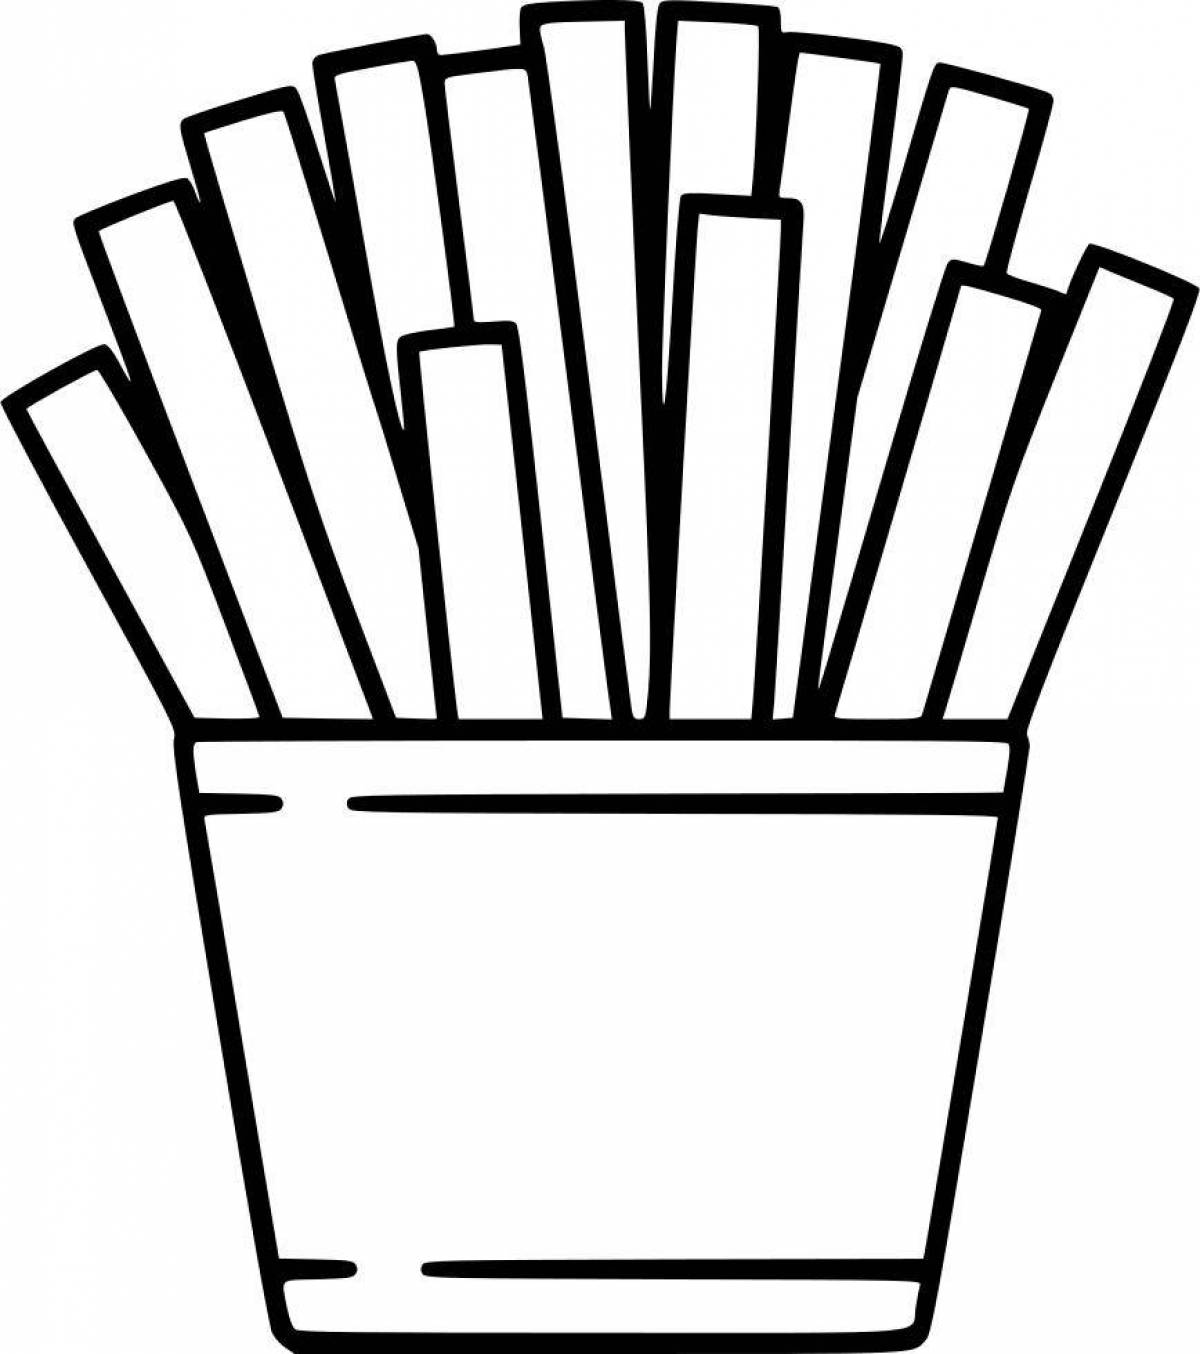 Coloring page spicy french fries